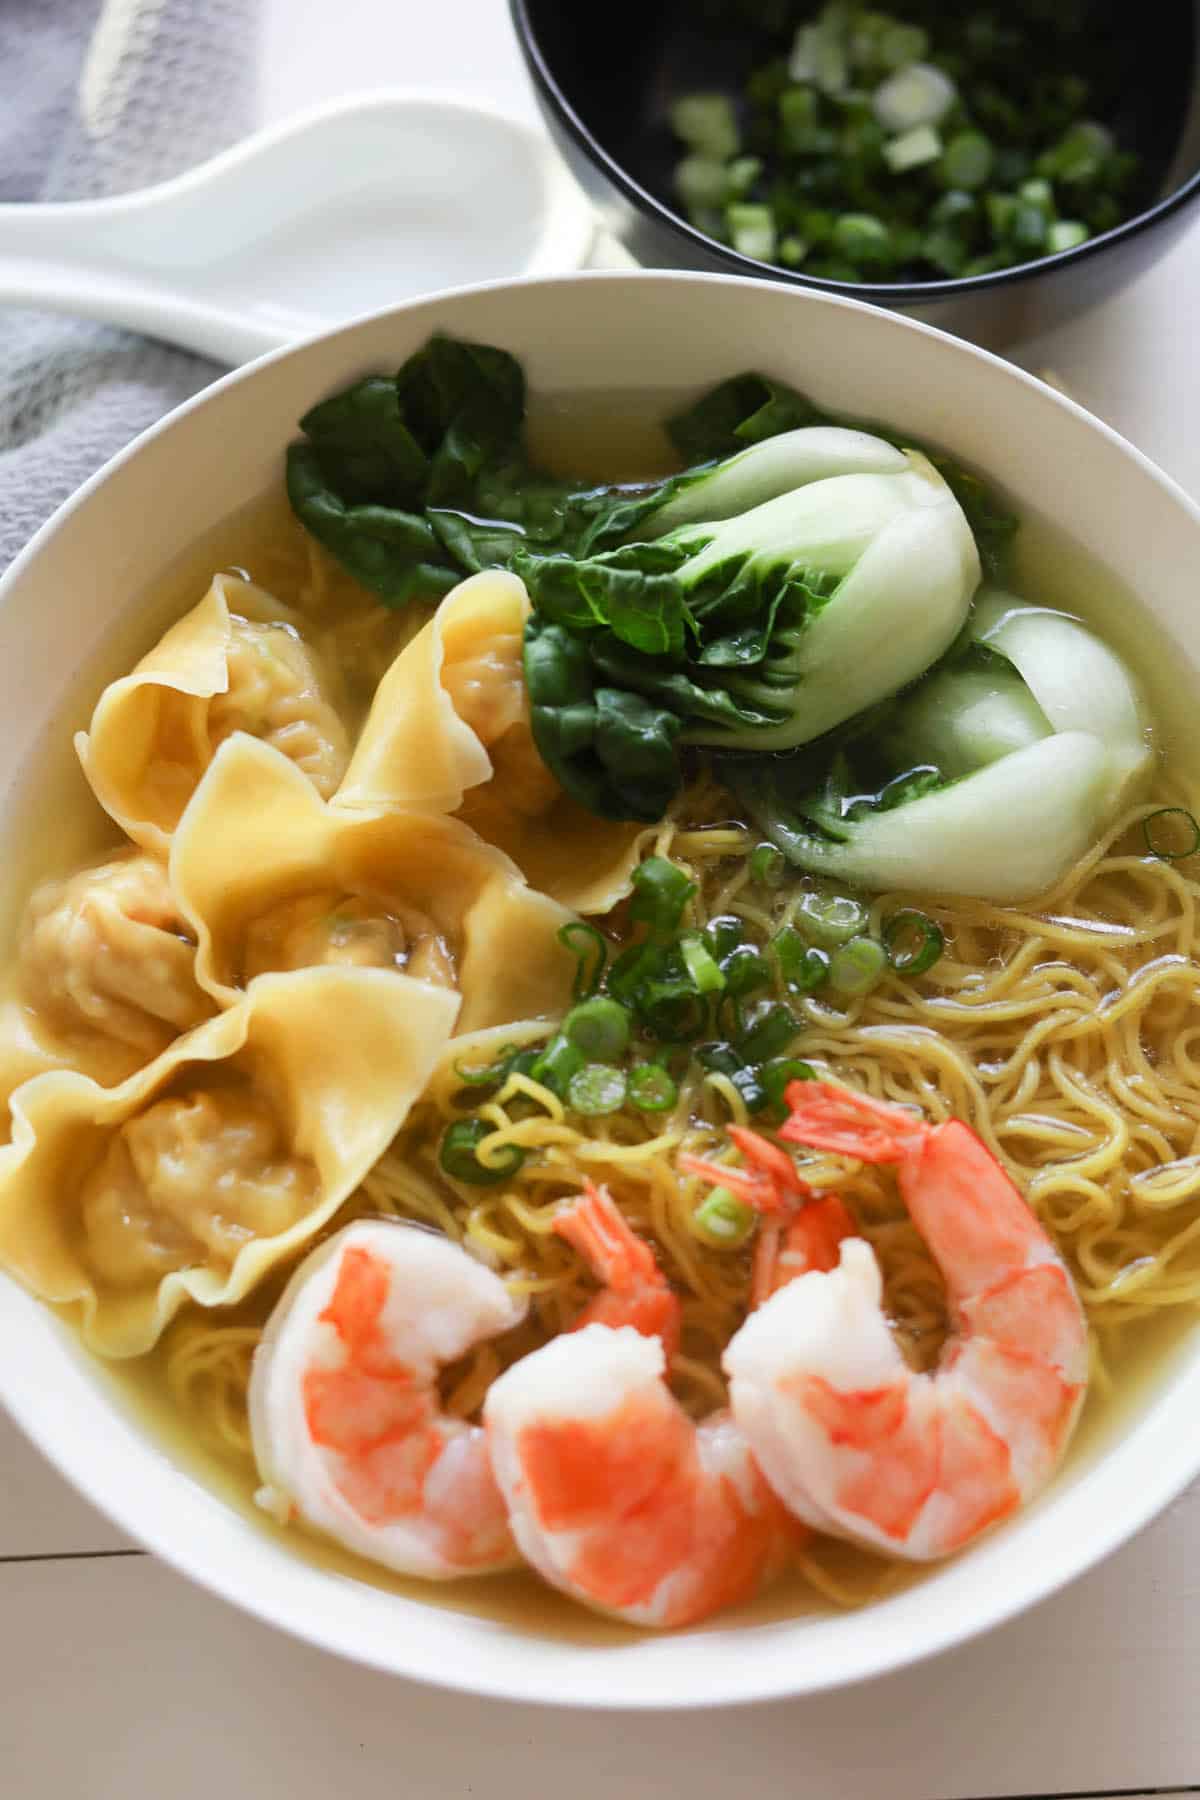 Bowl of egg noodles in broth with shrimp, bok choy and wontons, garnished with green onions.